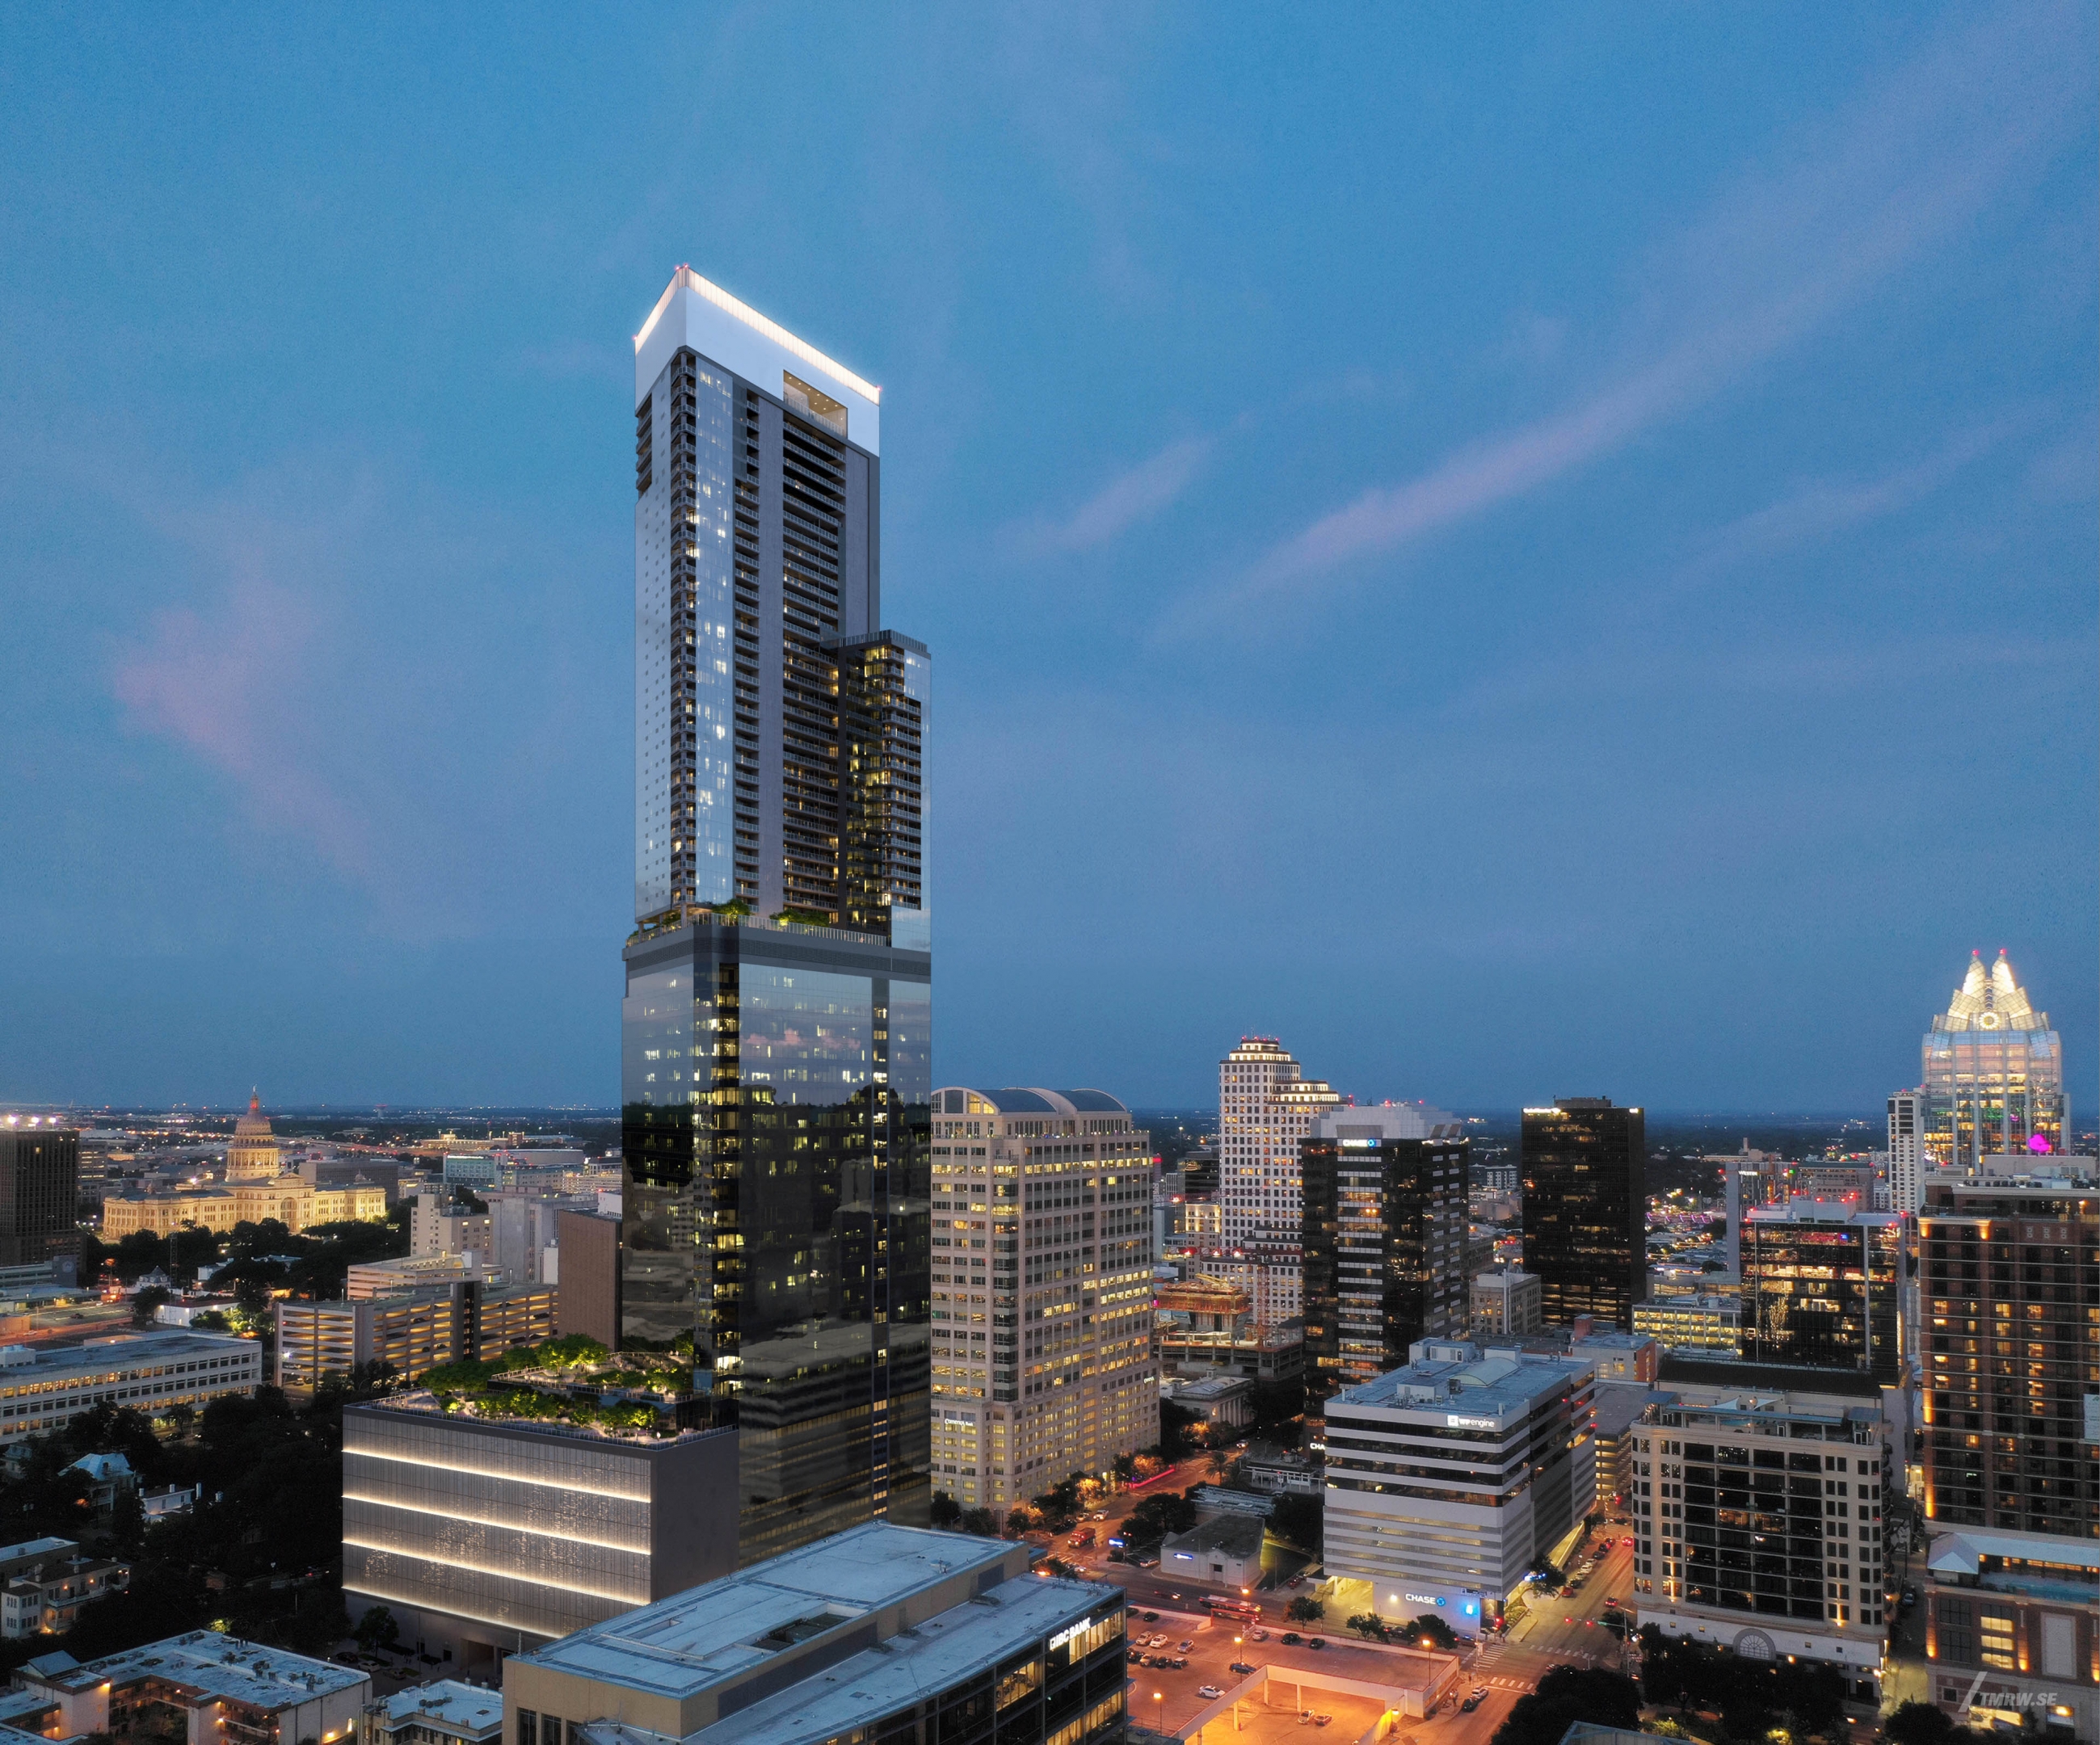 Architectural visualization of 6 x Guadalupe for Gensler, aerial of a glass office skyscraper in dusk, blue light